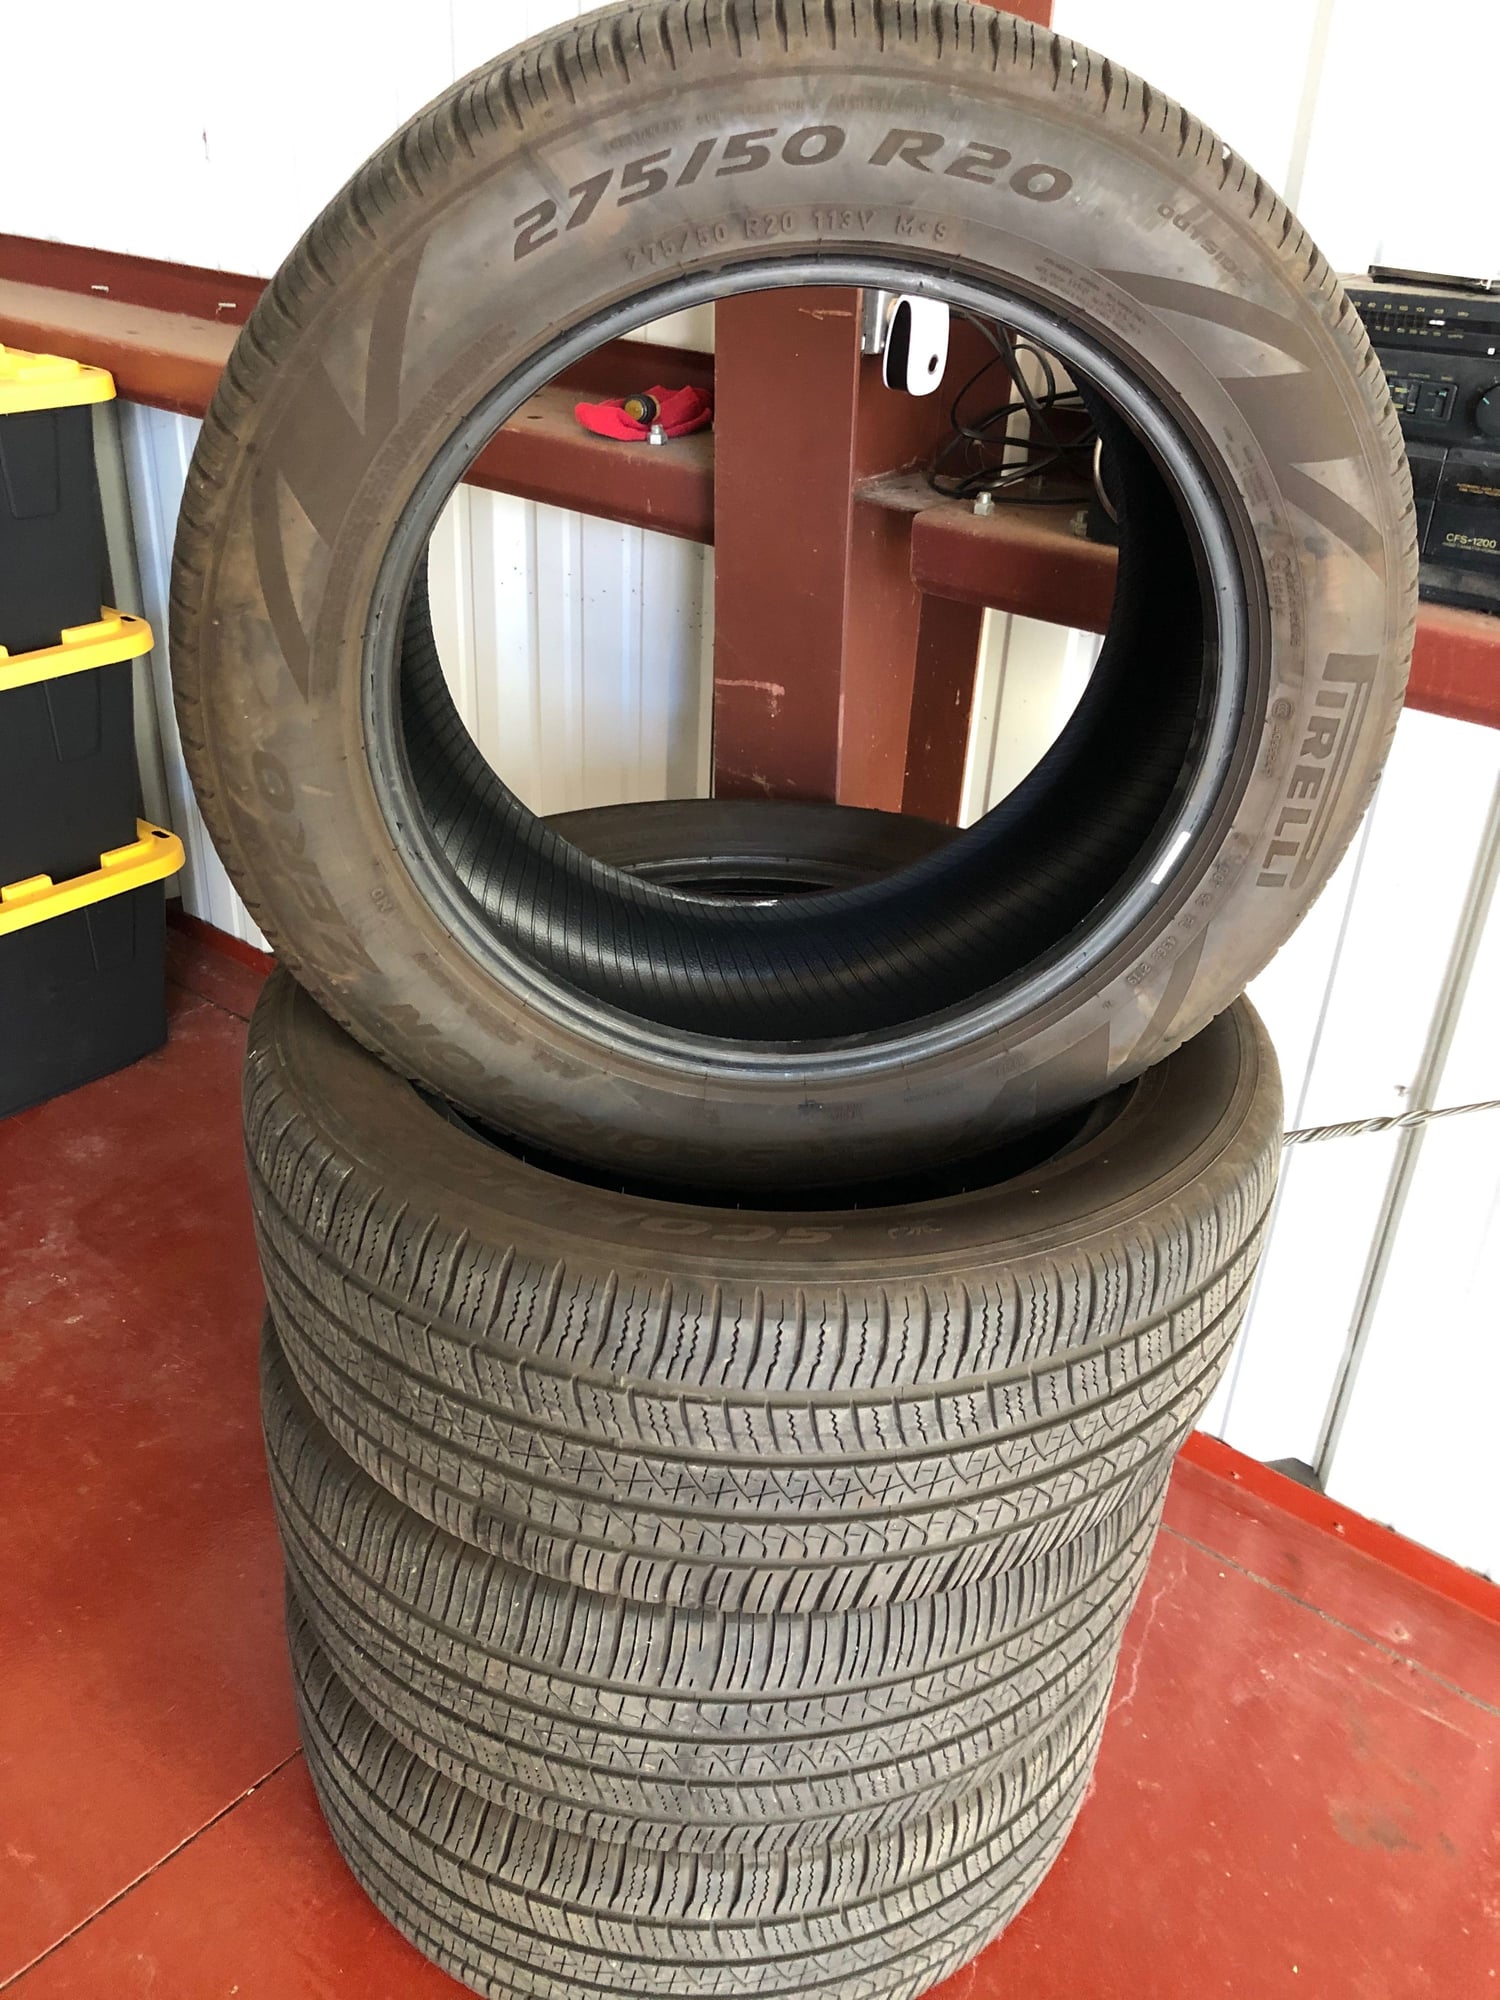 Wheels and Tires/Axles - Like New - (4) Pirelli Scorpion Zero All Season Tires 275/50R20 - Used - All Years Mercedes-Benz G550 - All Years Mercedes-Benz G500 - All Years Mercedes-Benz G63 AMG - Novato, CA 94945, United States